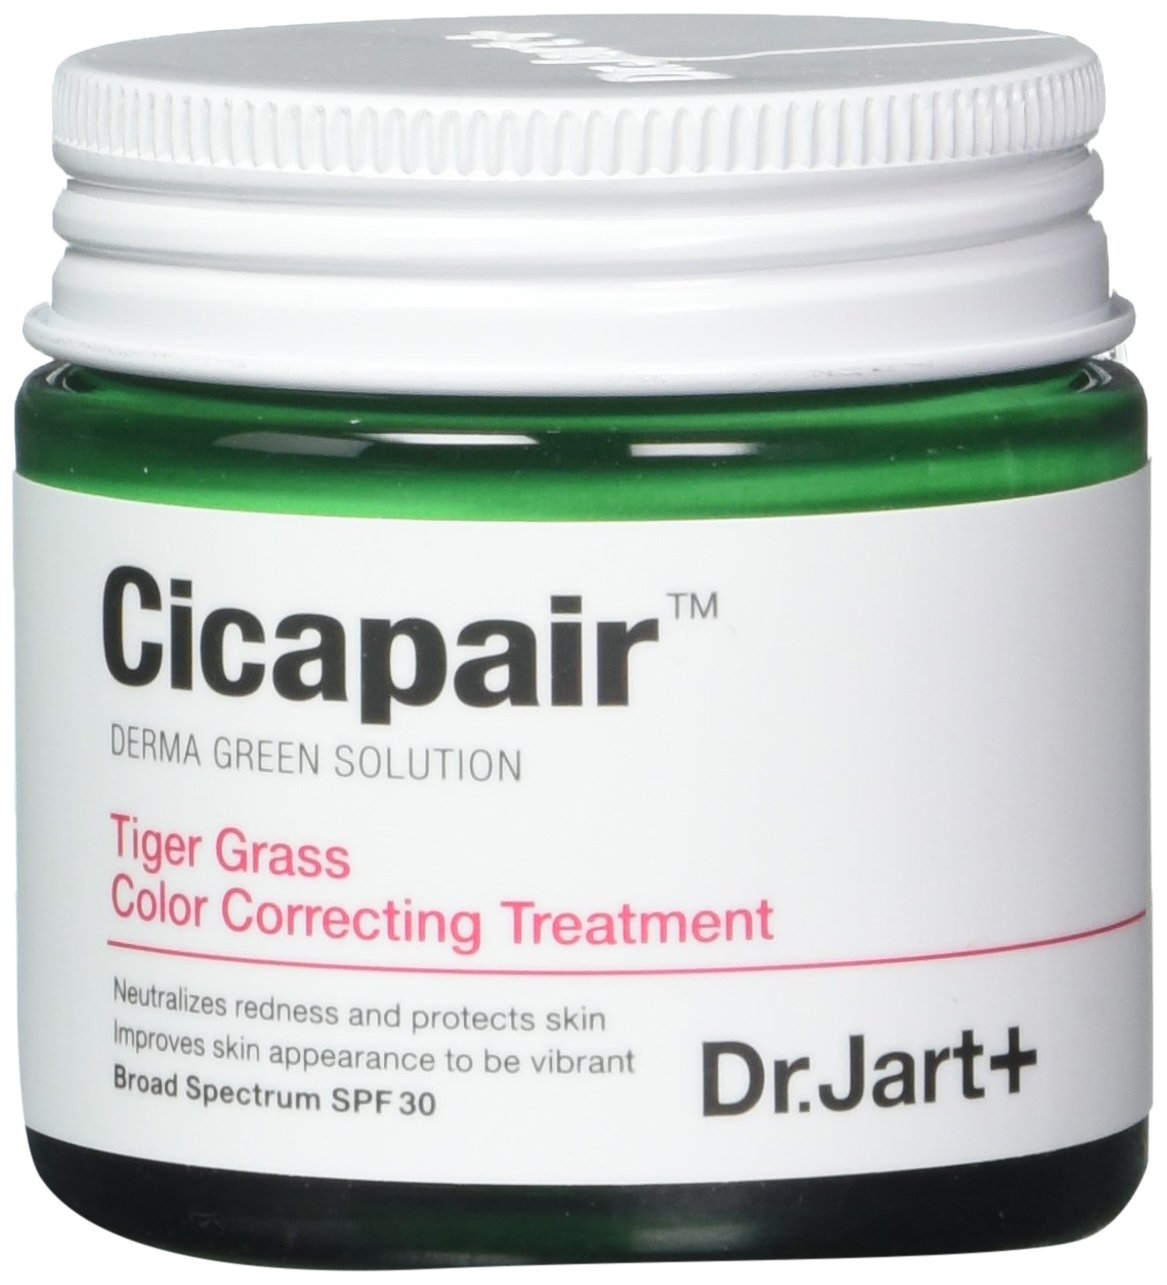 best sephora buys - Dr JART + CICAPAIR TIGER GRASS COLOR CORRECTING TREATMENT SPF 30 